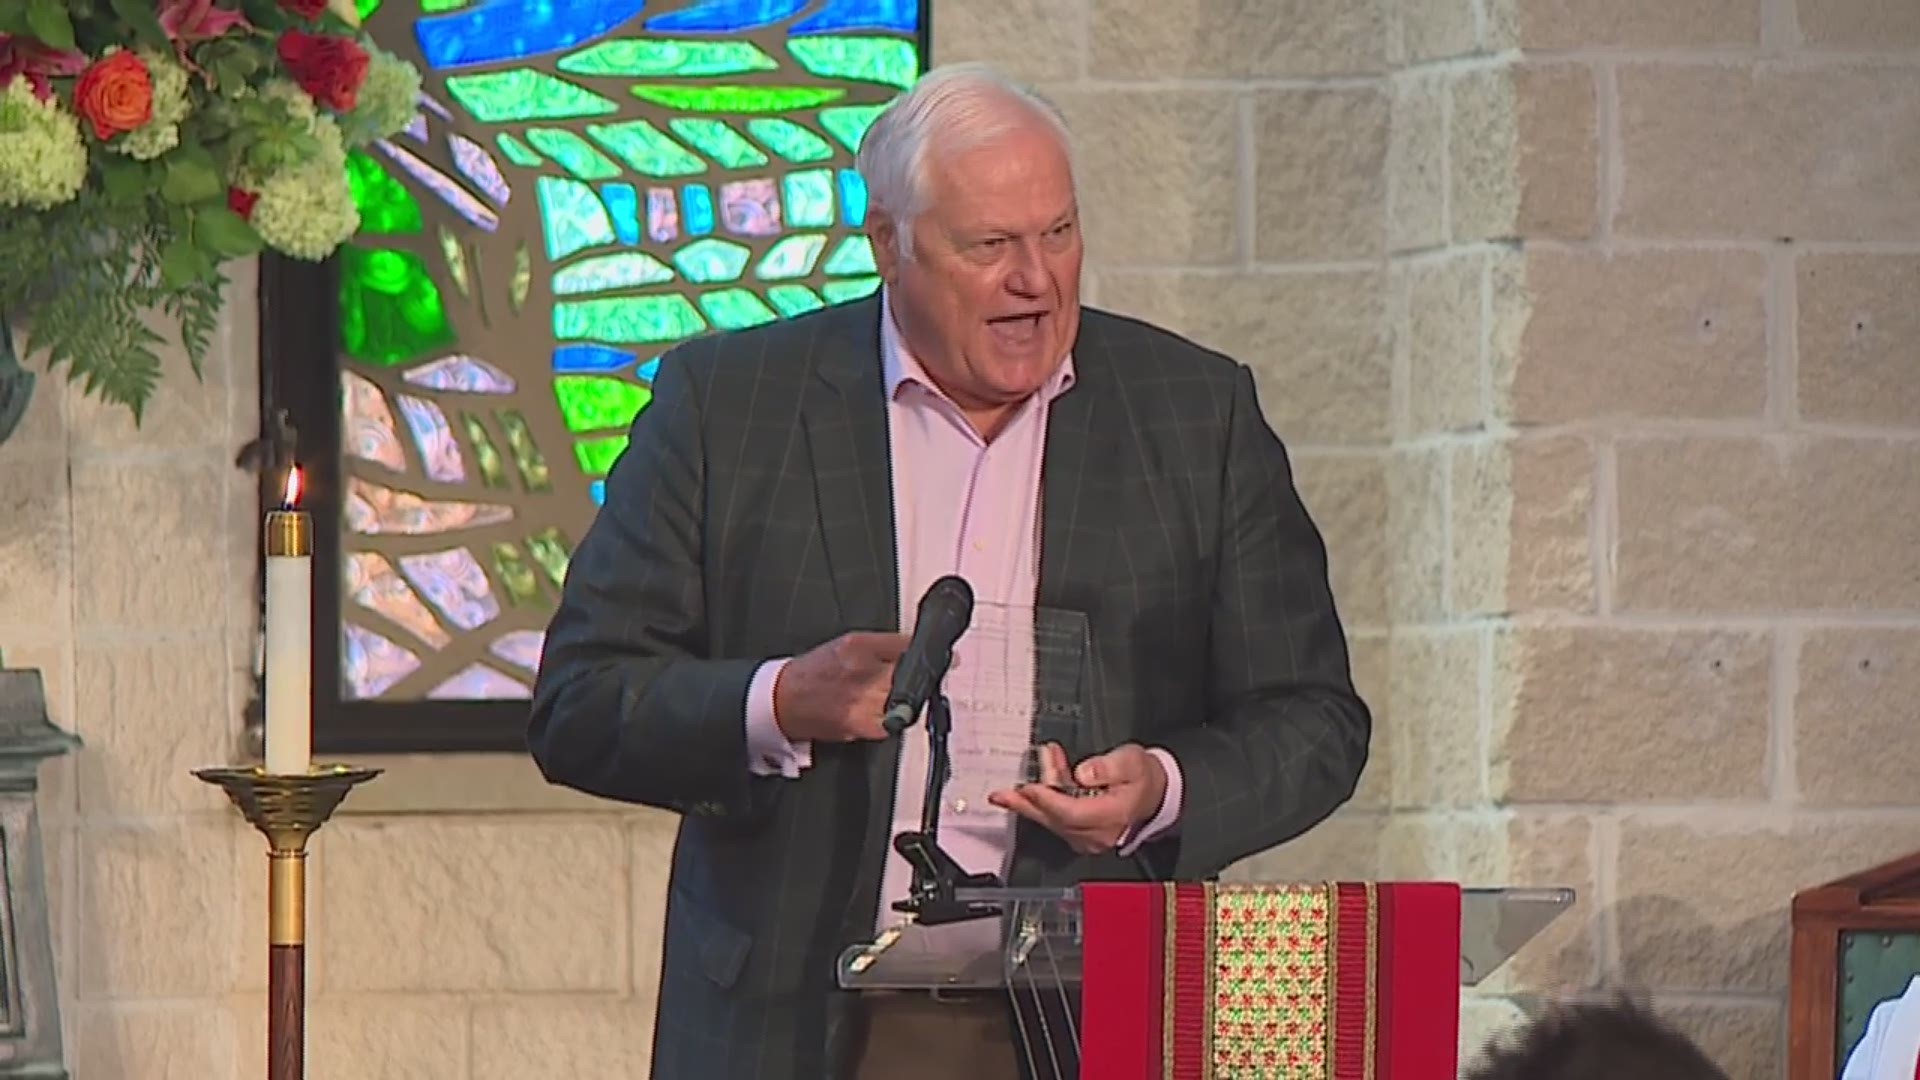 The Cathedral of Hope in Dallas awarded WFAA's Dale Hansen with its Hero of Hope honor this weekend.